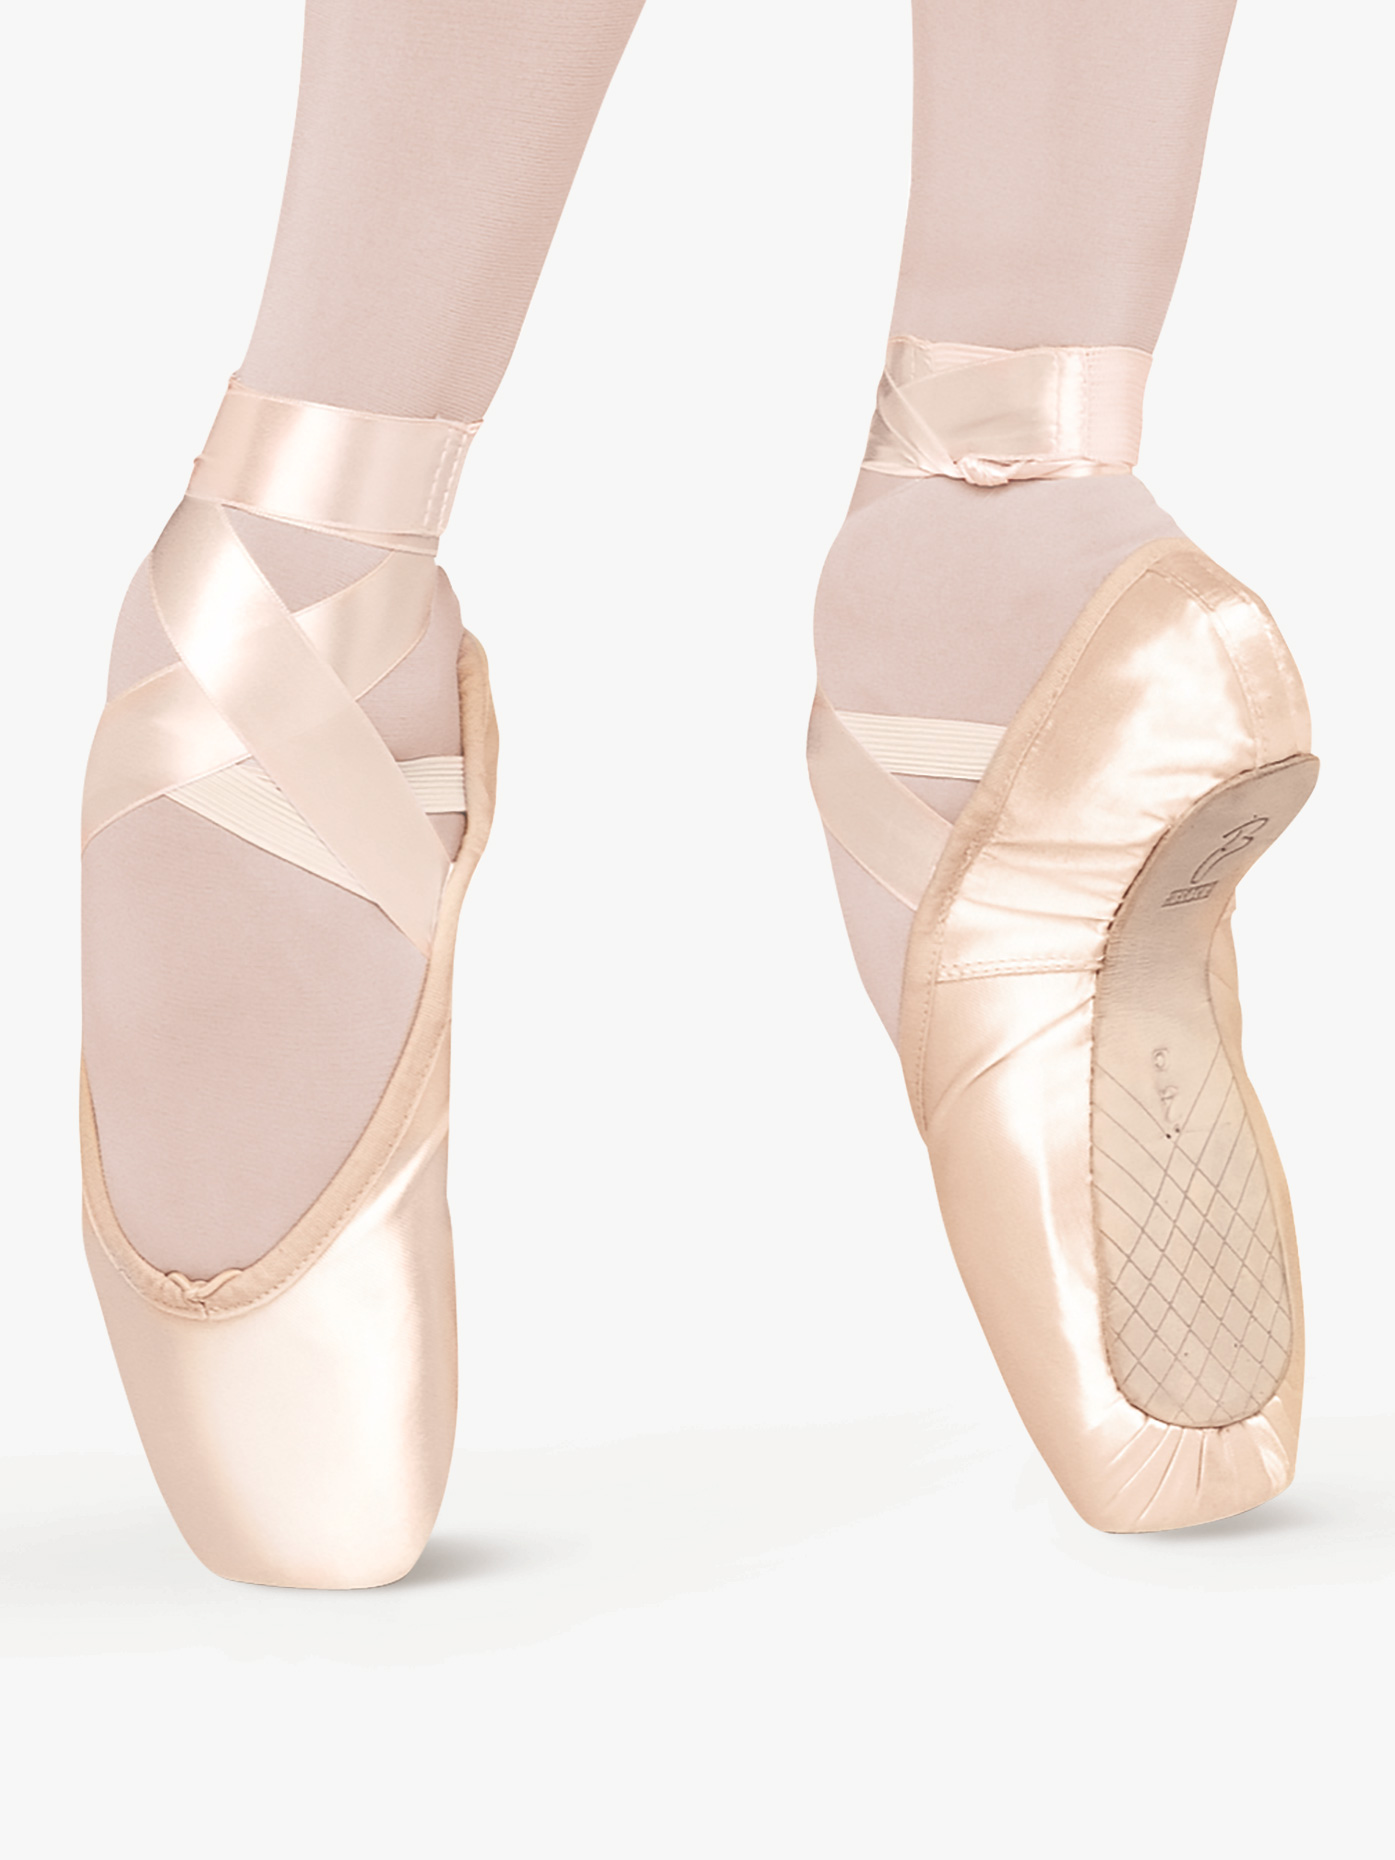 demi pointe shoes beginners promo code 